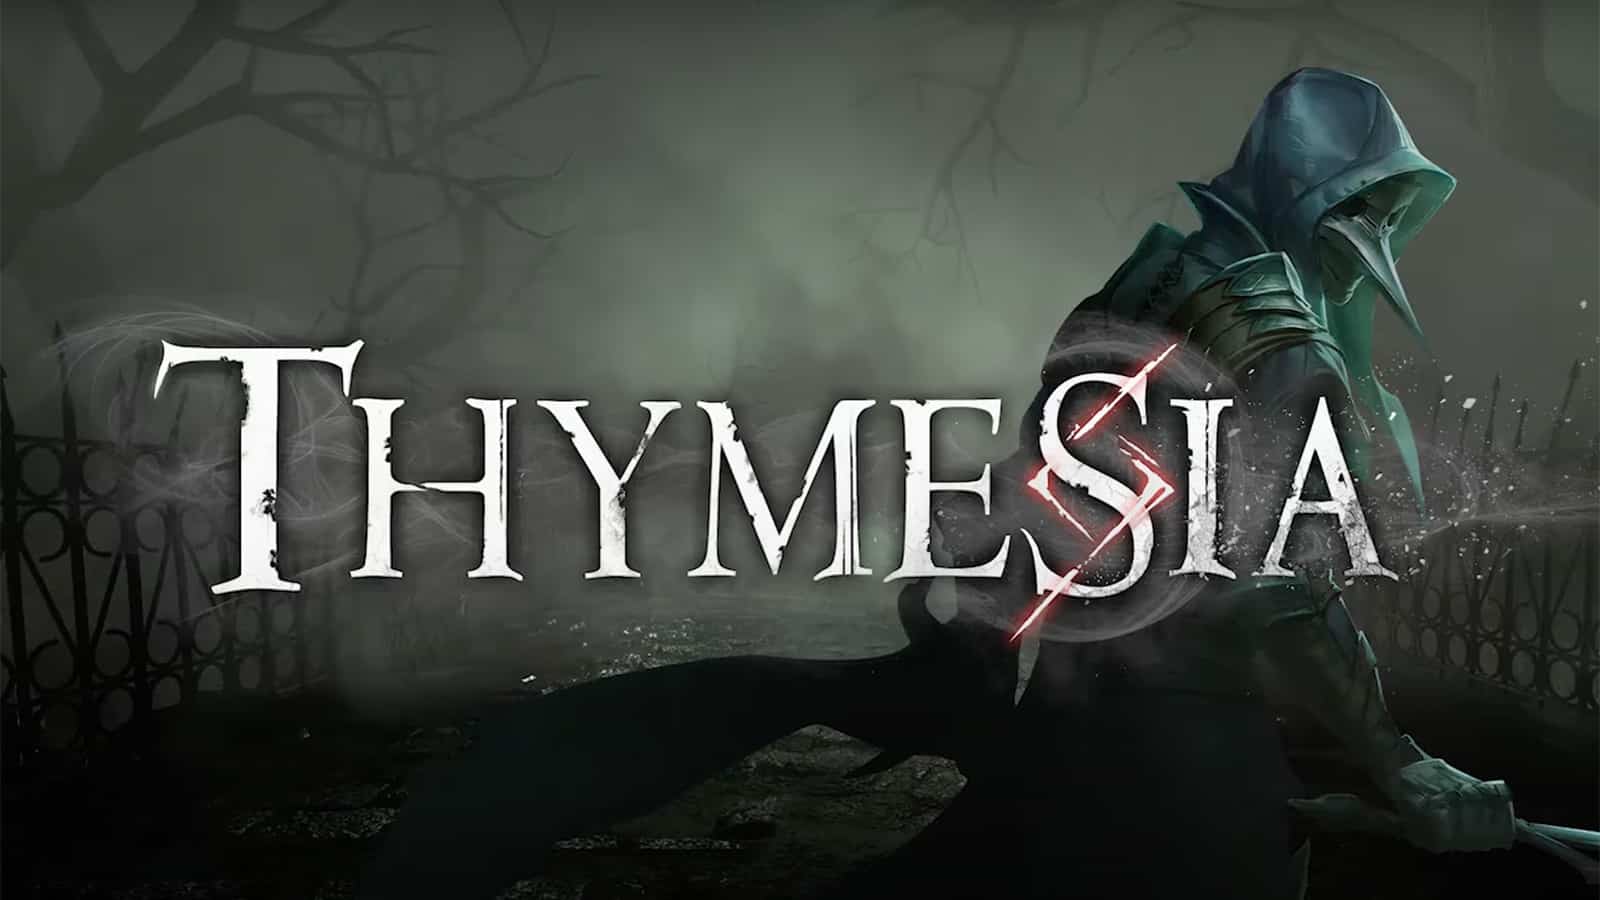 Everything We Know About Thymesia: Story, Gameplay & More